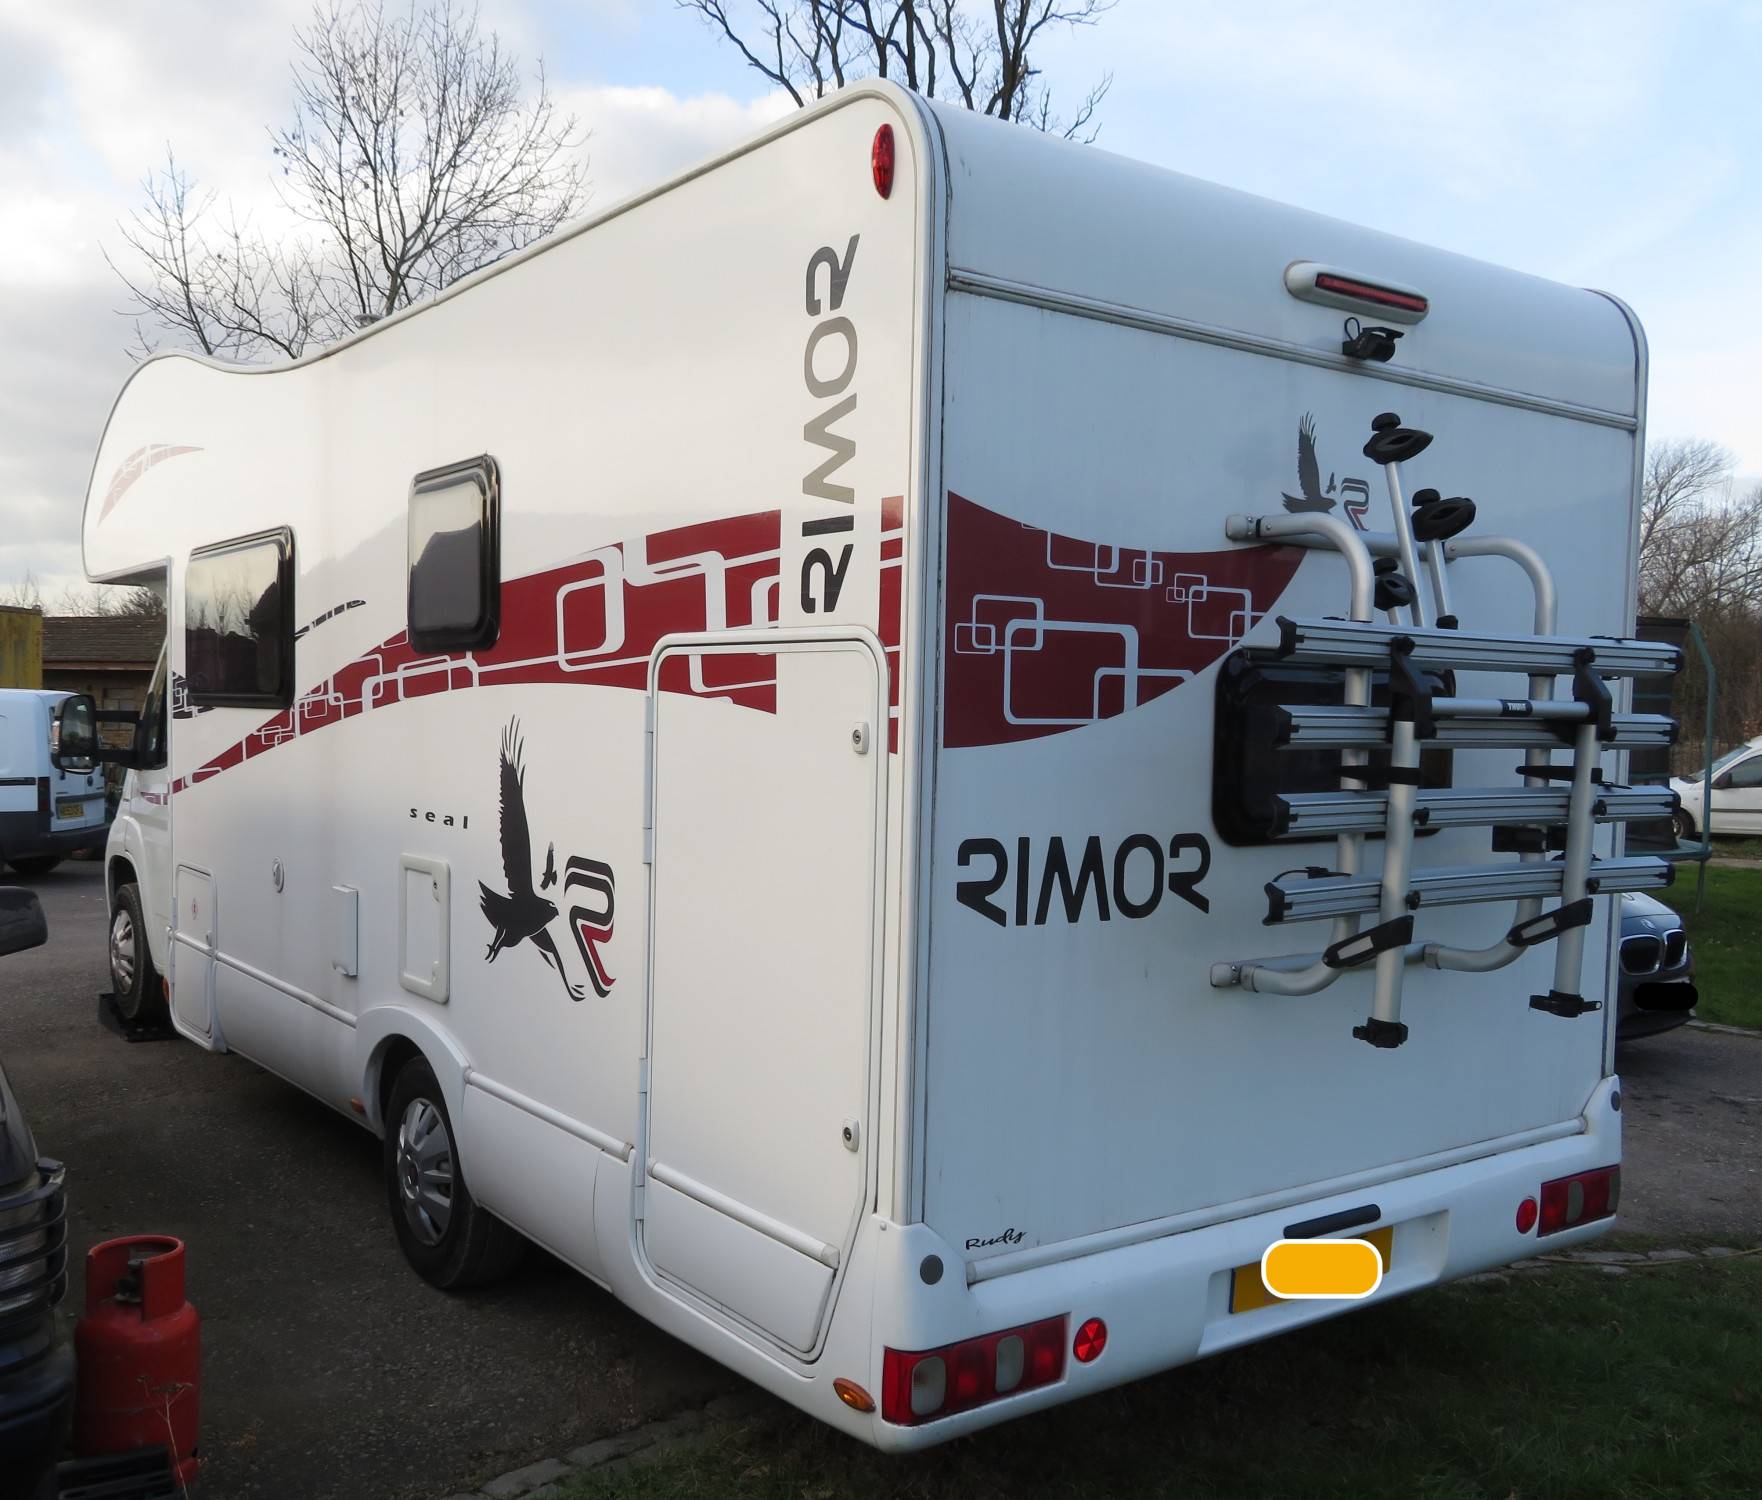 A Rimor Motorhome called Seal and for hire in High Wycombe, Buckinghamshire